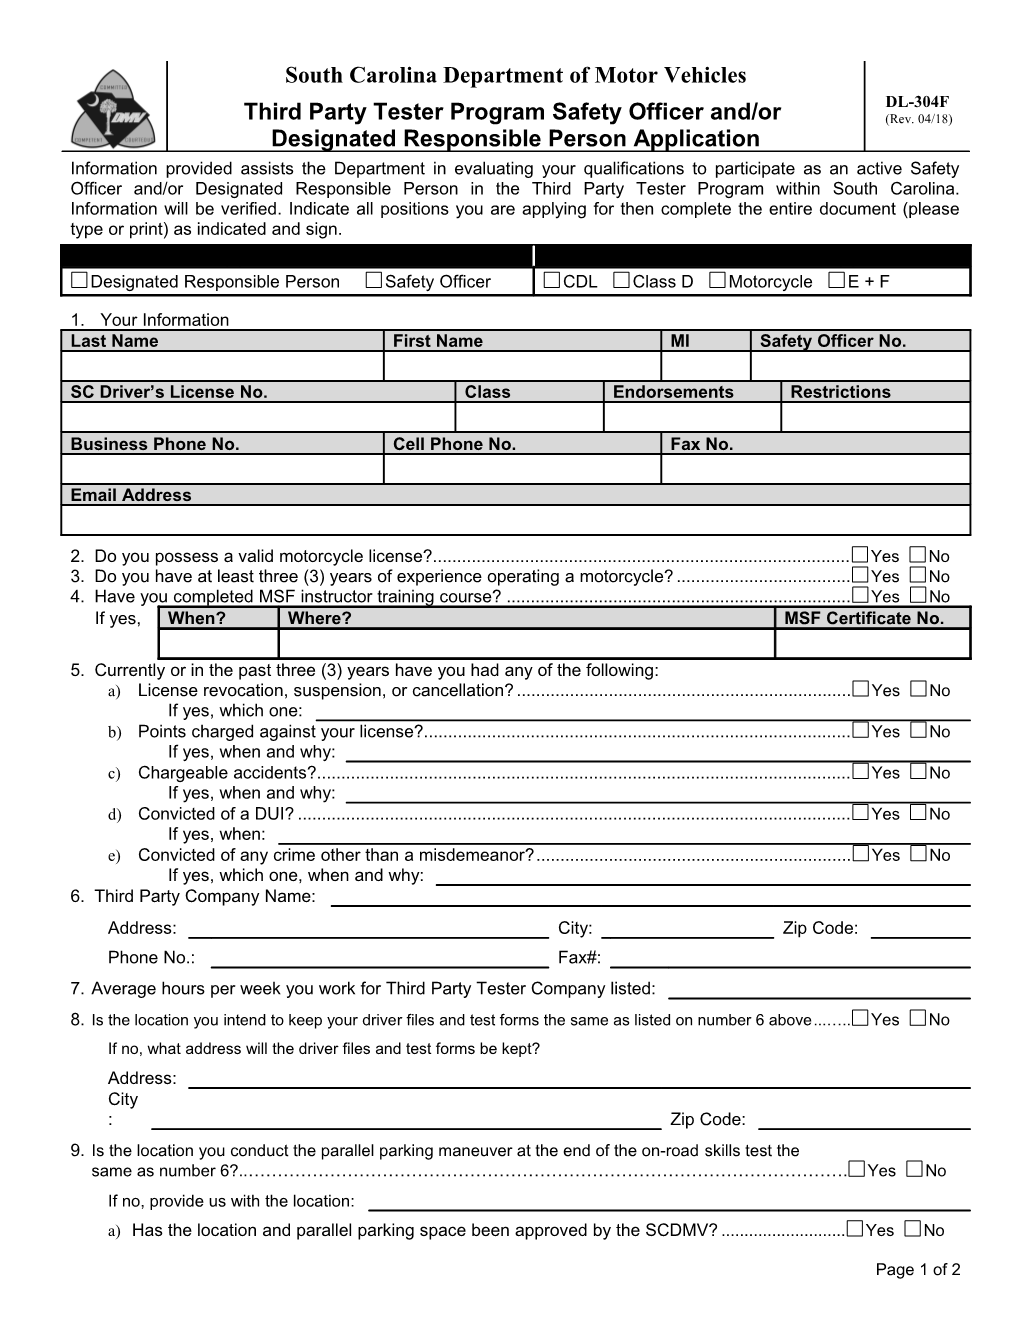 Completed Application (Form DL-304F), And